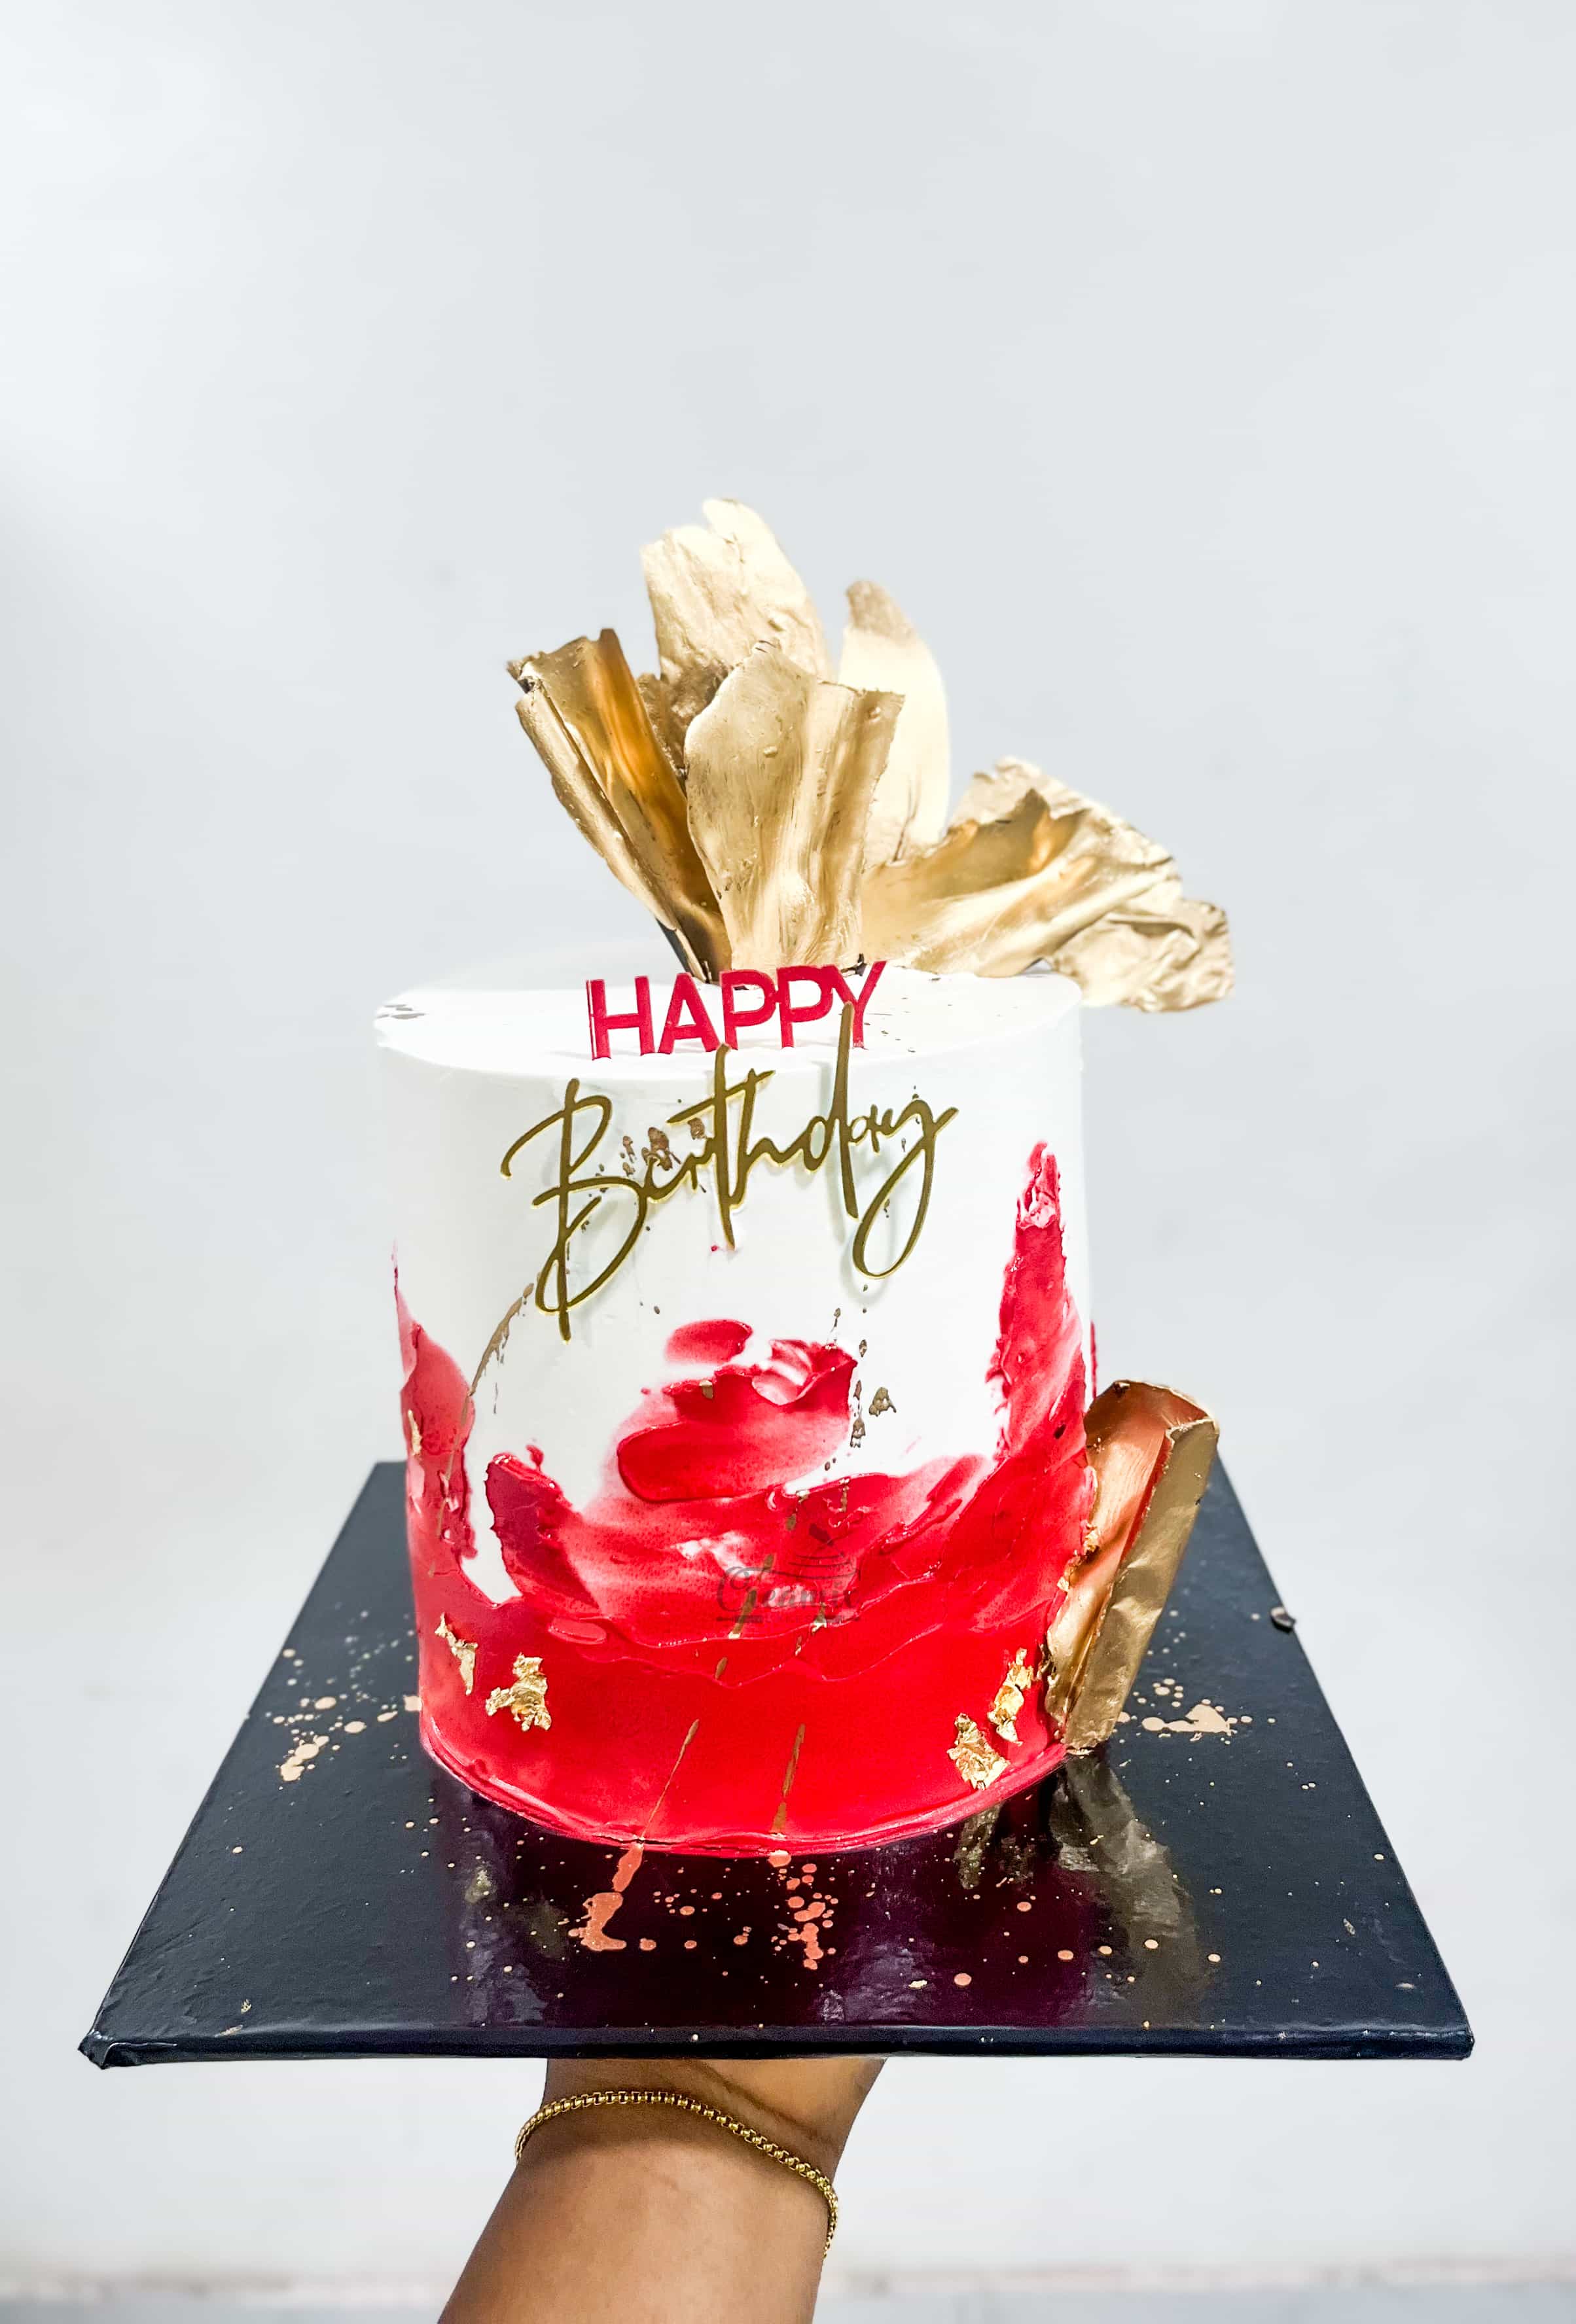 6 inch 3 layers Red White & Gold Cake - Available in Vanilla, Red Velvet, Chocolate, etc.